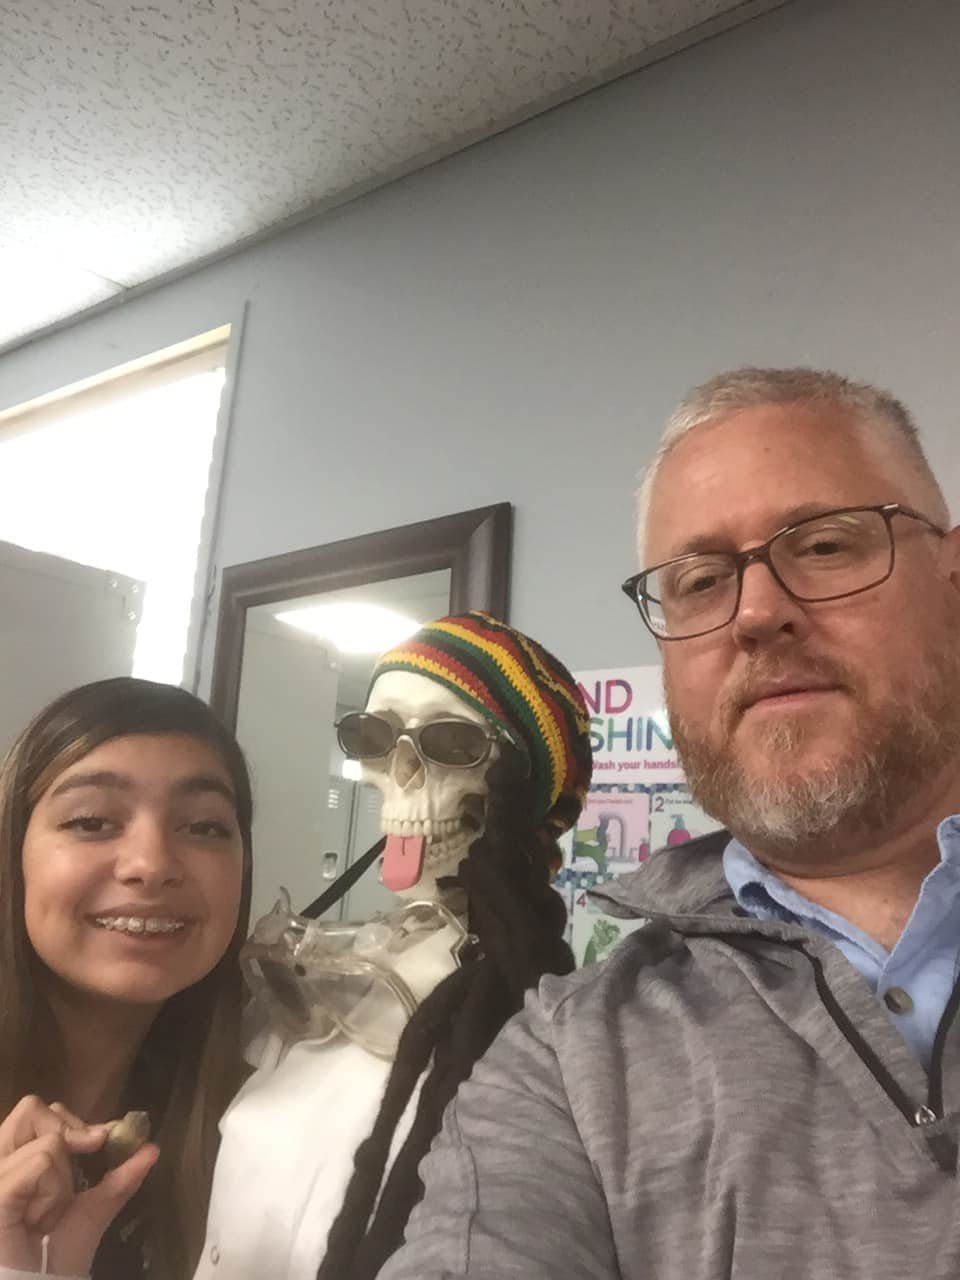 Emma, 8th grade, is pictured with her teacher Doug Nickalson.